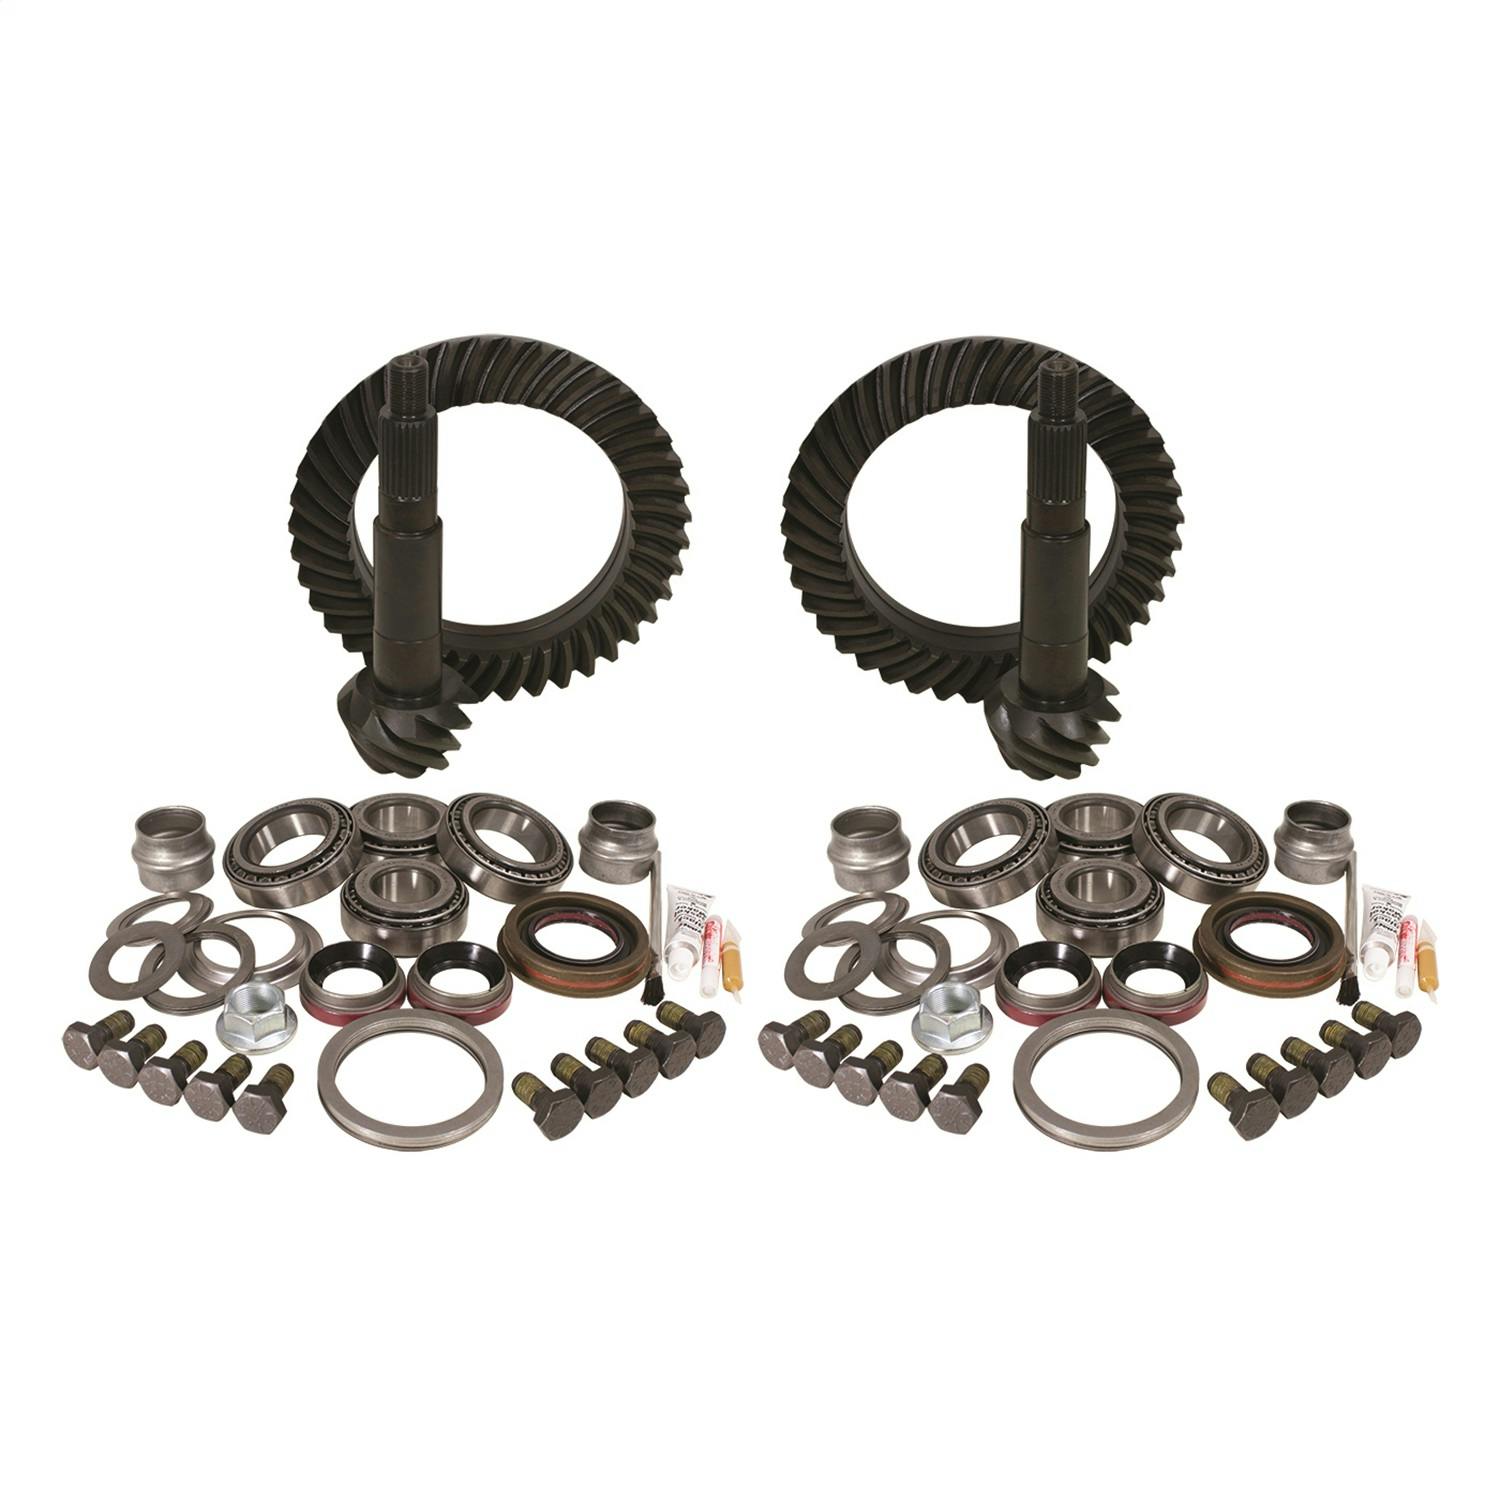 USA Standard Gear ZGK010 Ring And Pinion Set And Complete Install Kit